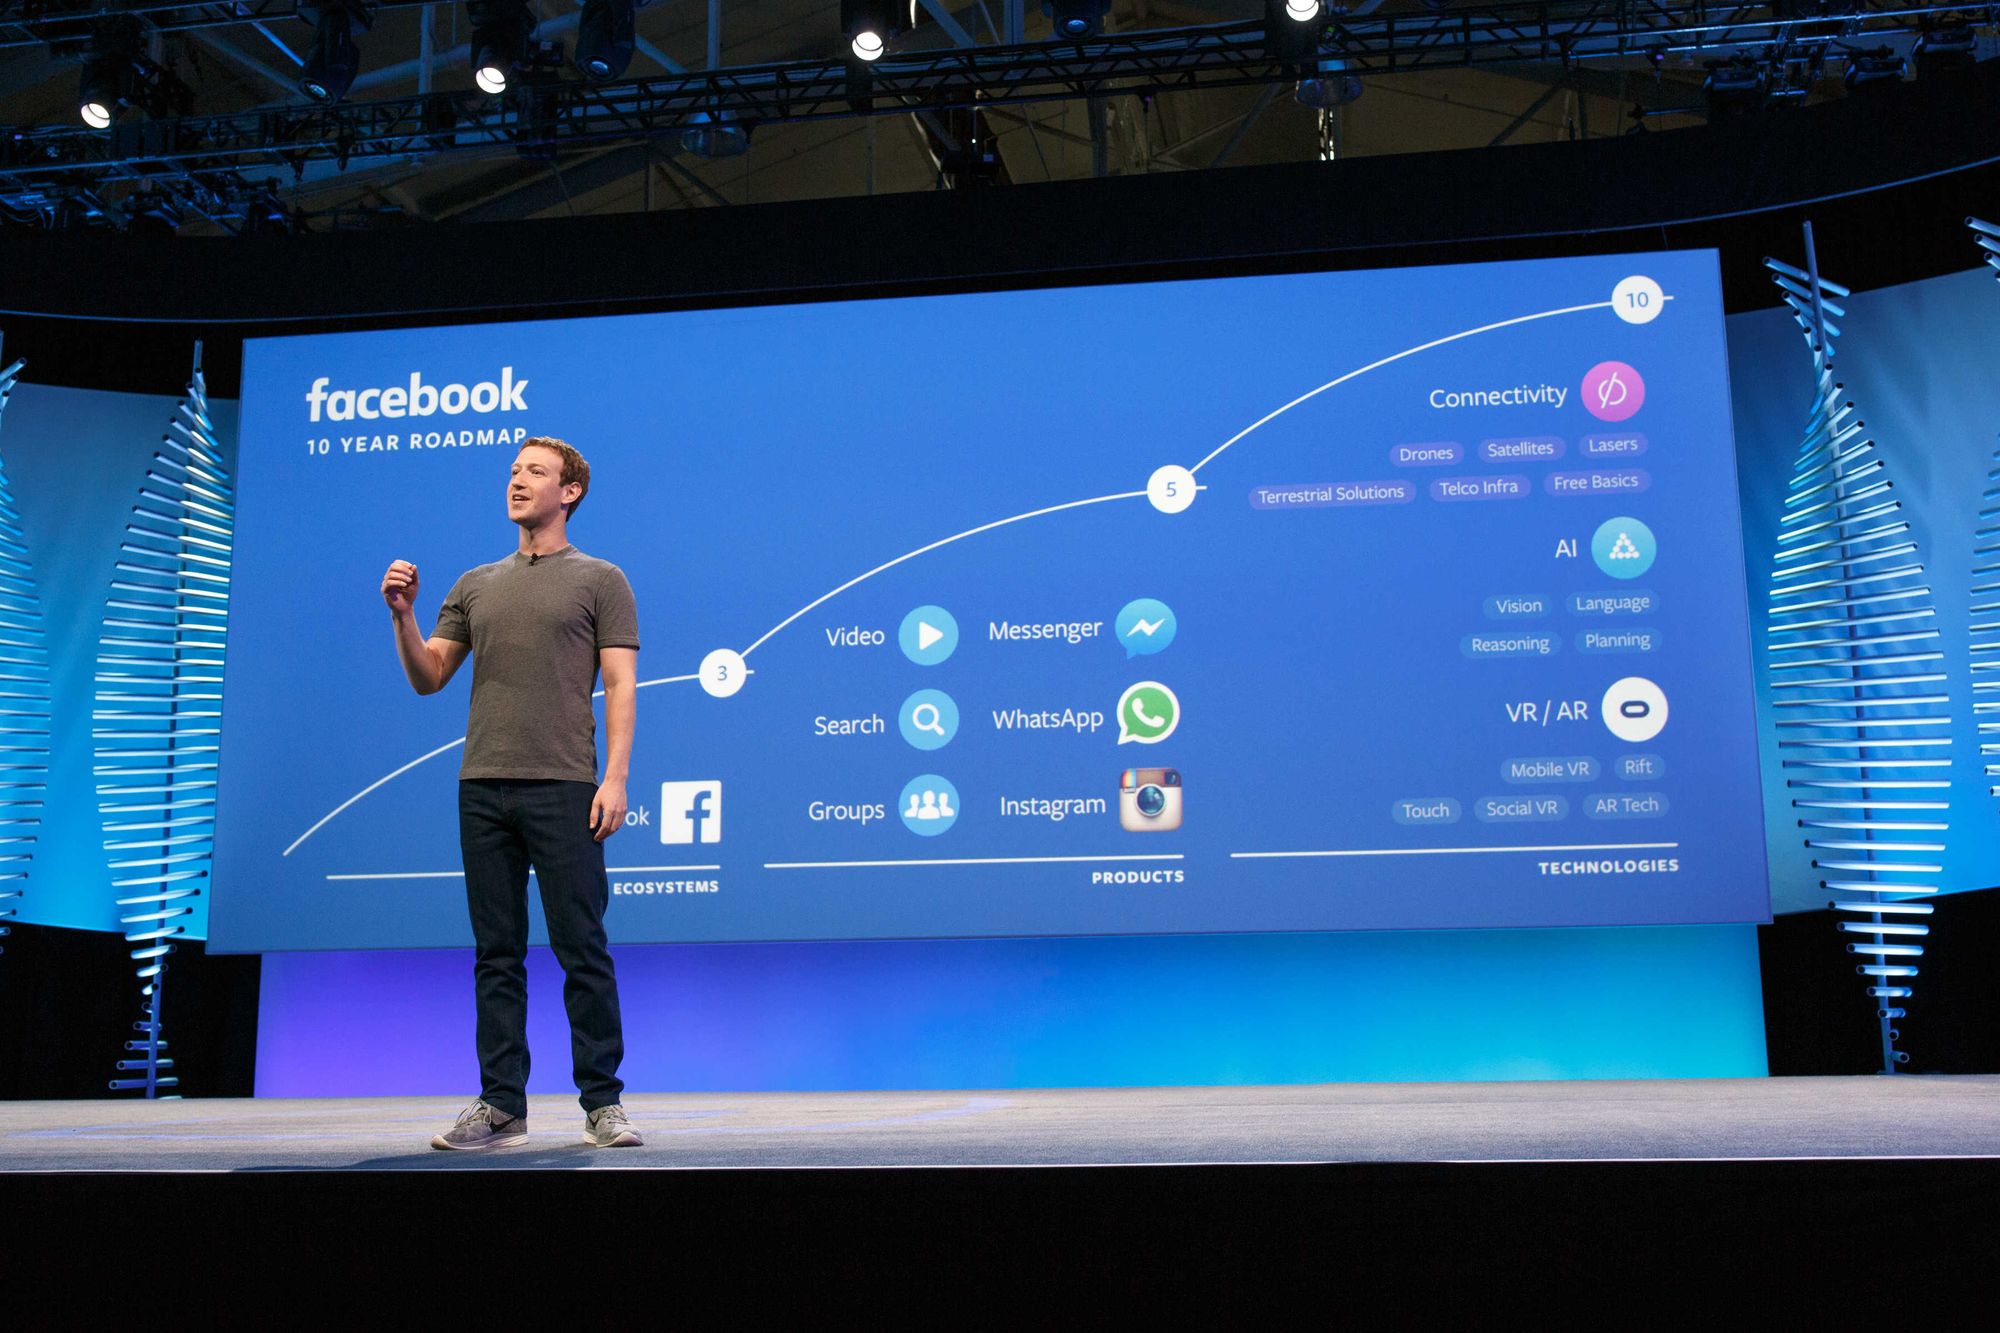 F8 Update: 10 New Facebook Features Every Marketer Should Know